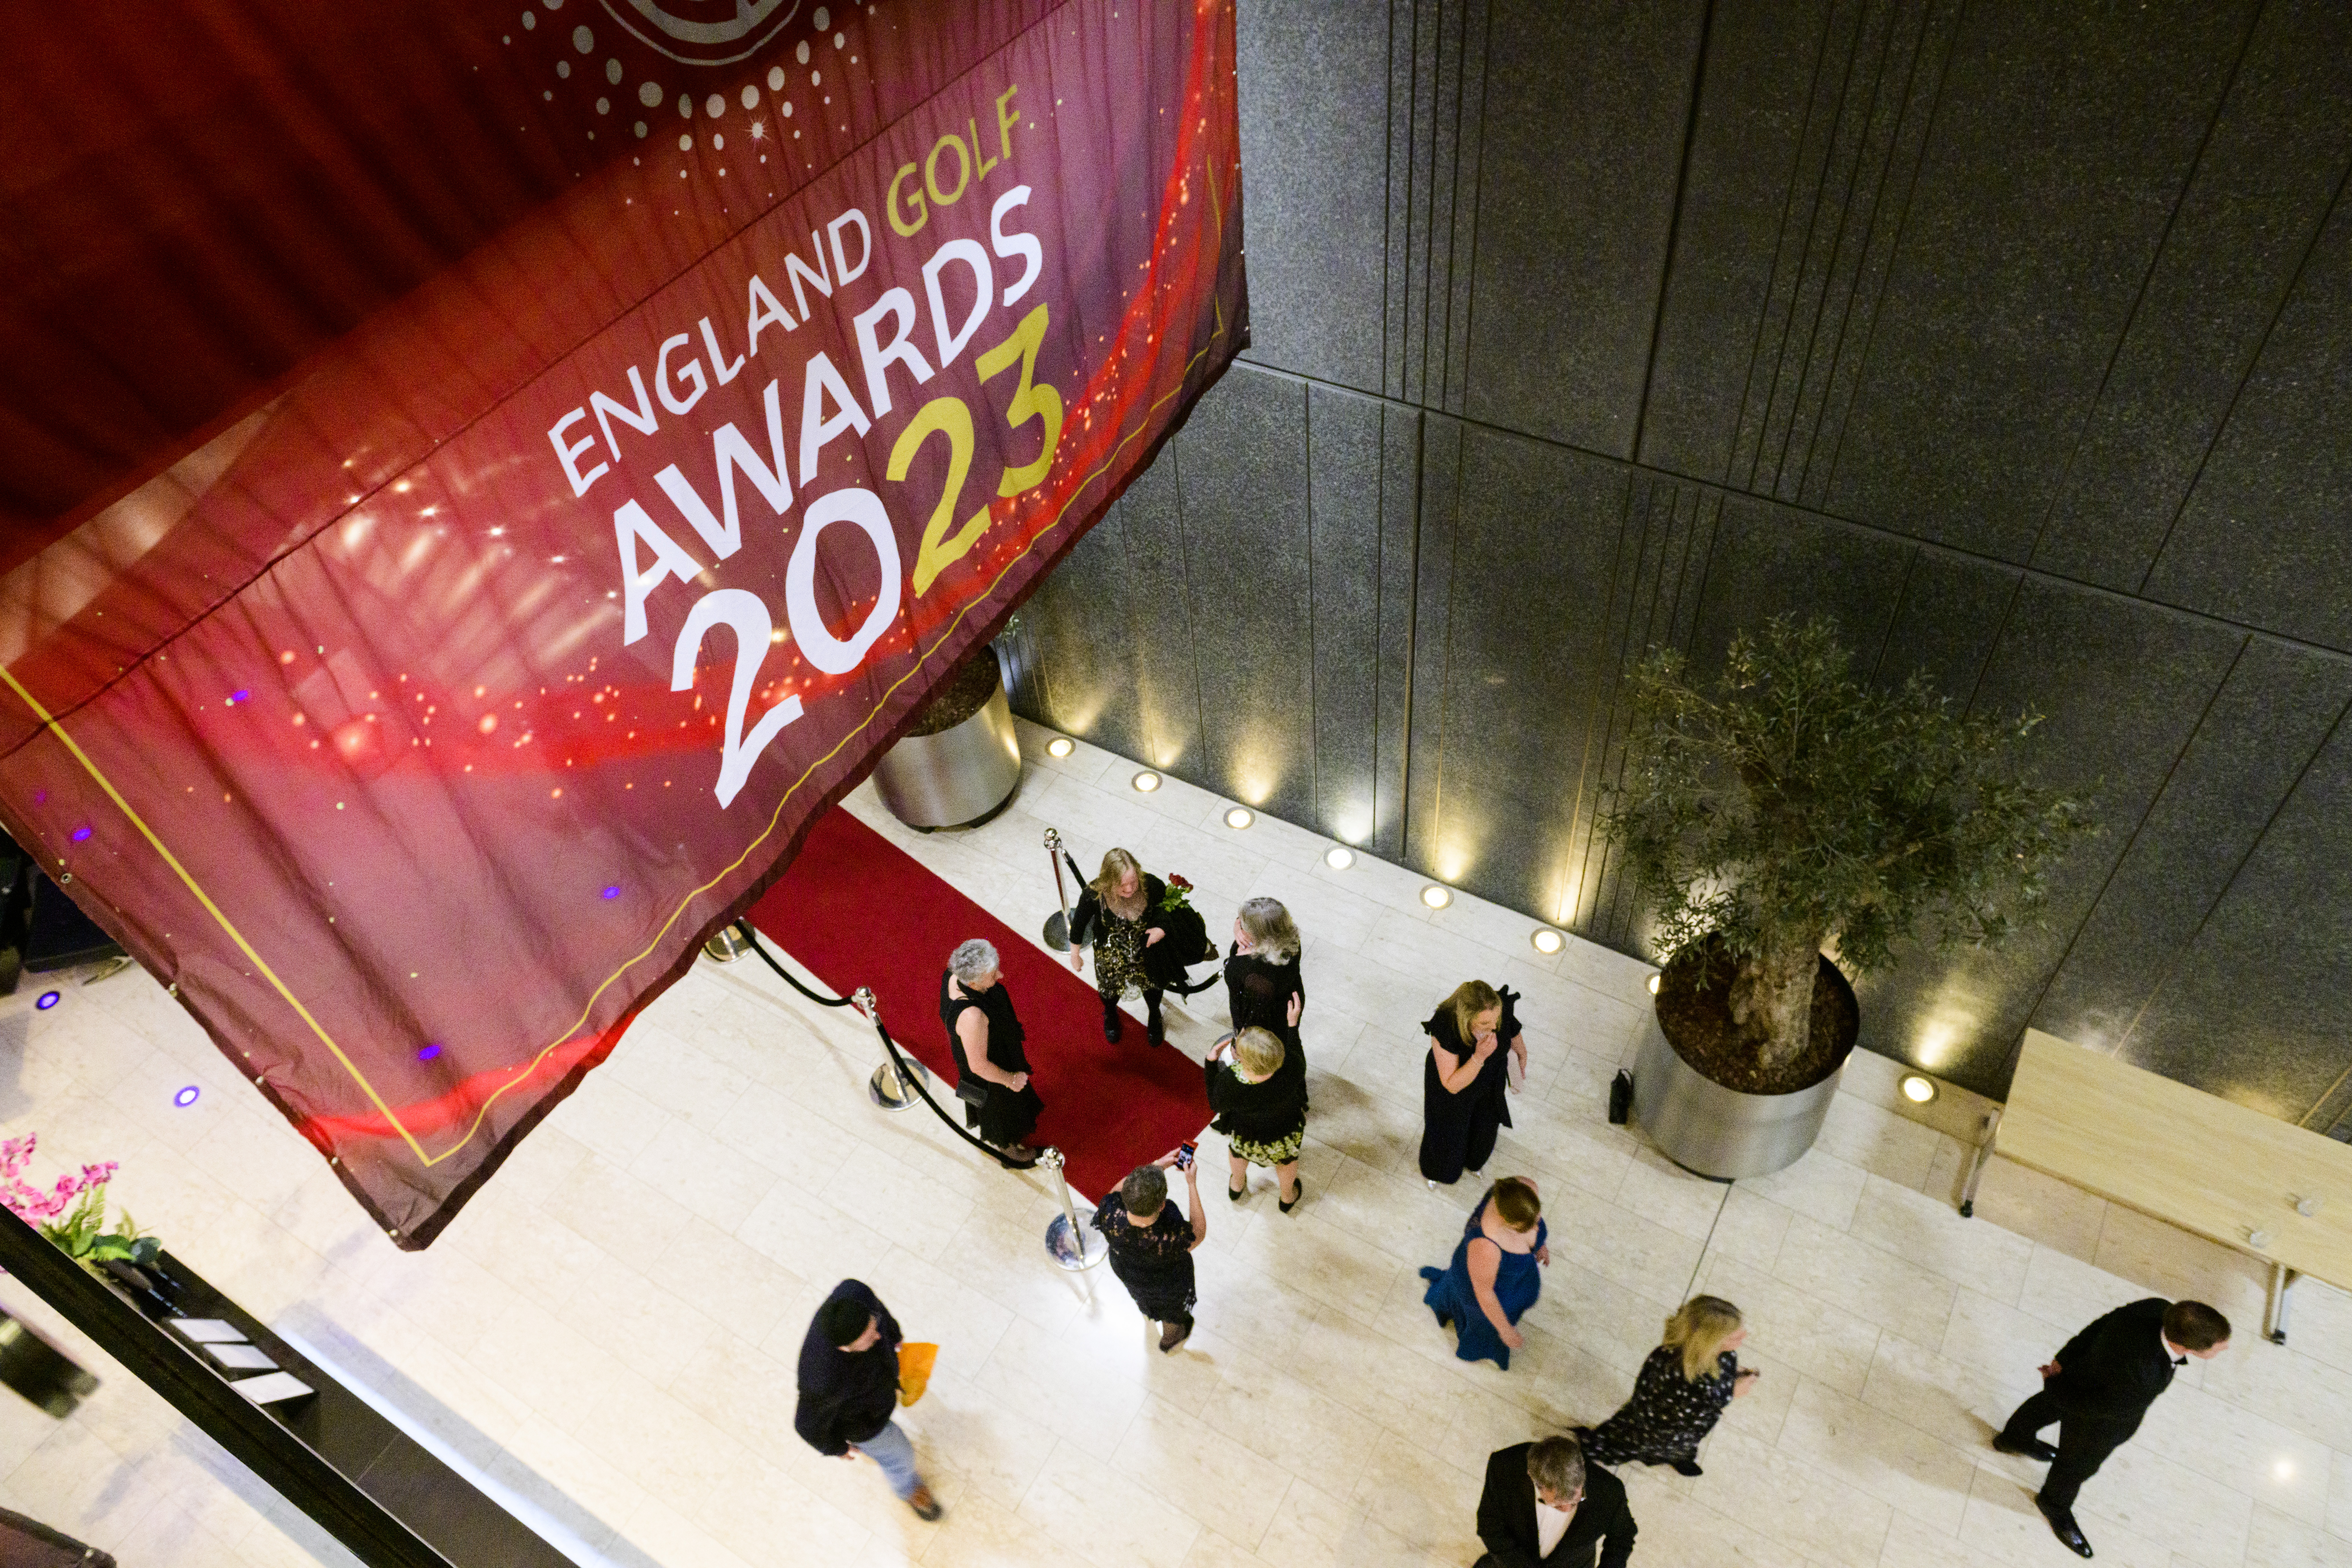 The red carpet at the England Golf Awards 2023.